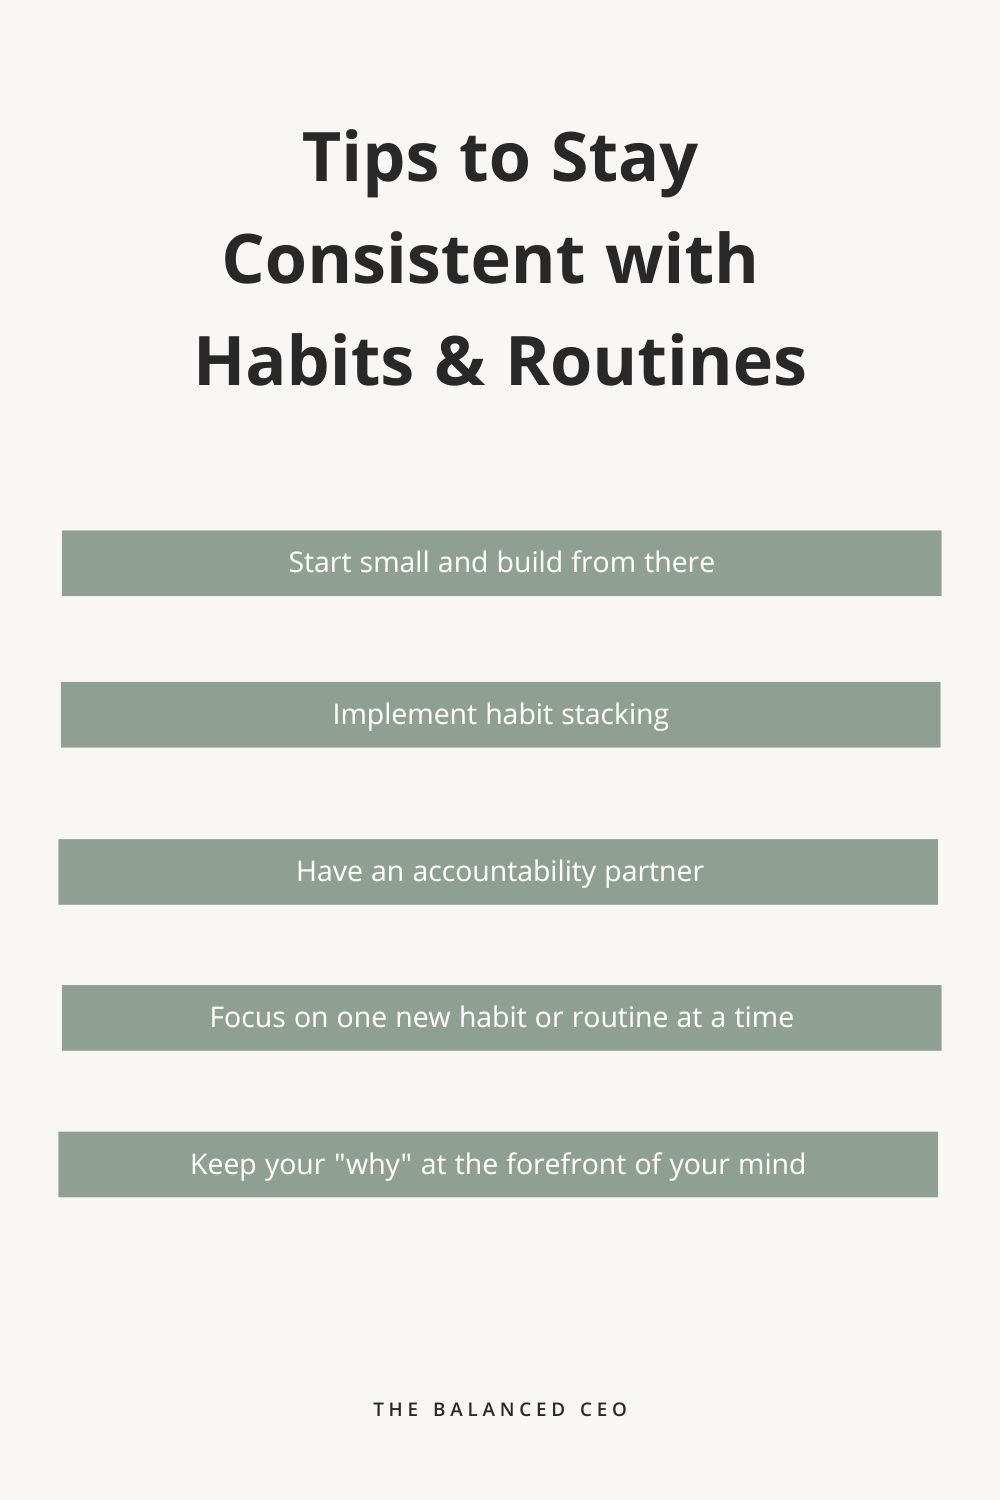 Tips to Stay Consistent with Habits and Routines